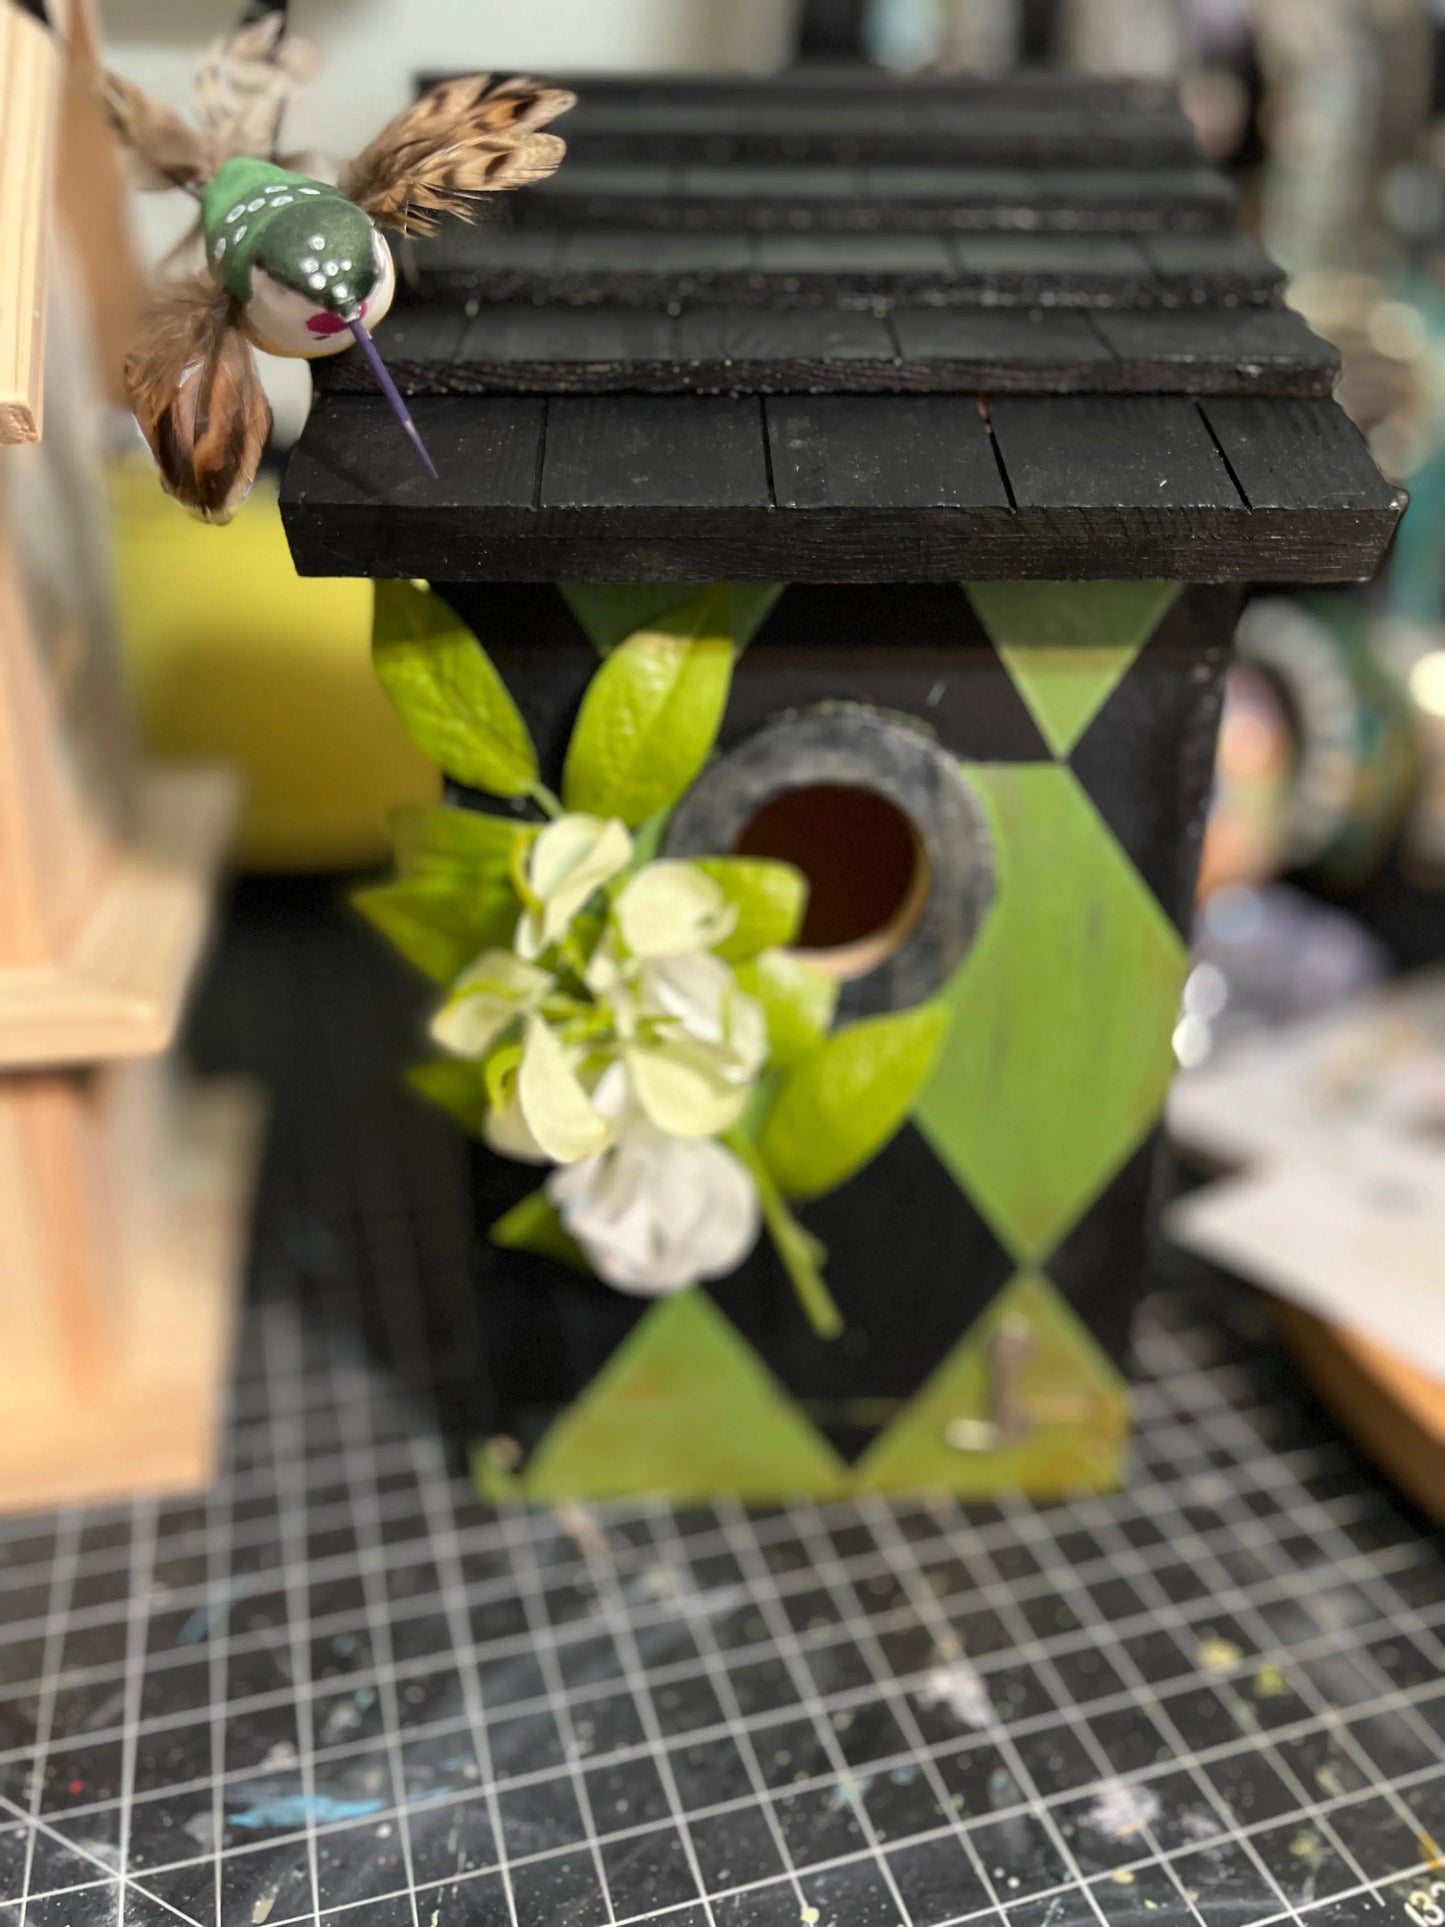 Home Decor Harlequin Pattern Green and Black Birdhouse Cedar Hill Country Market